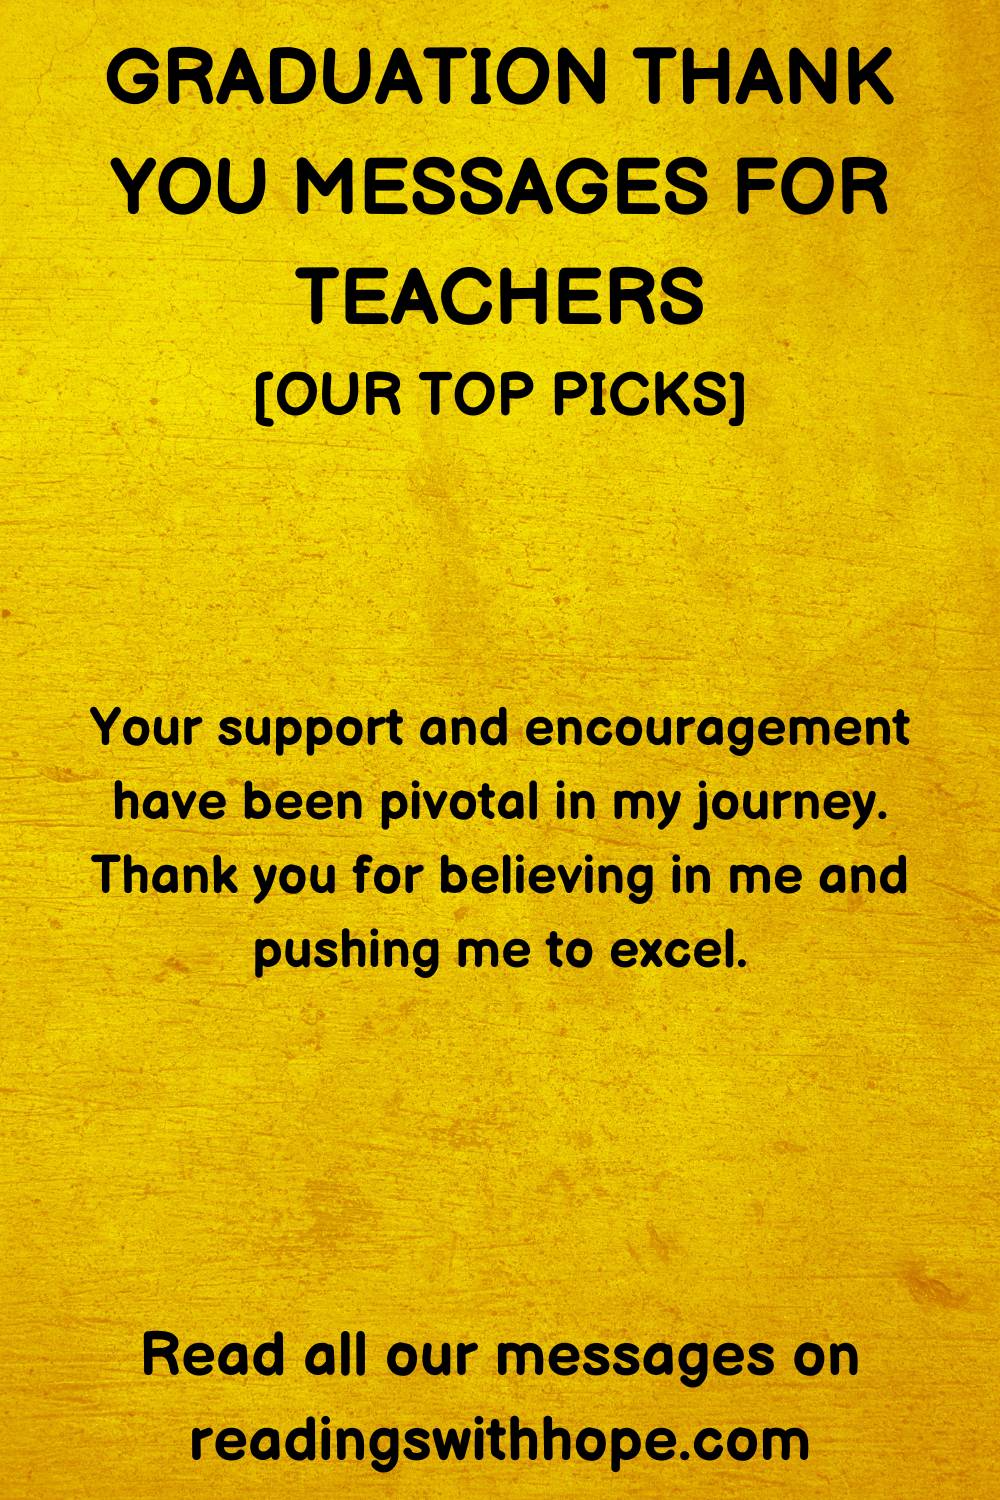 Graduation Thank You Message for your teachers
